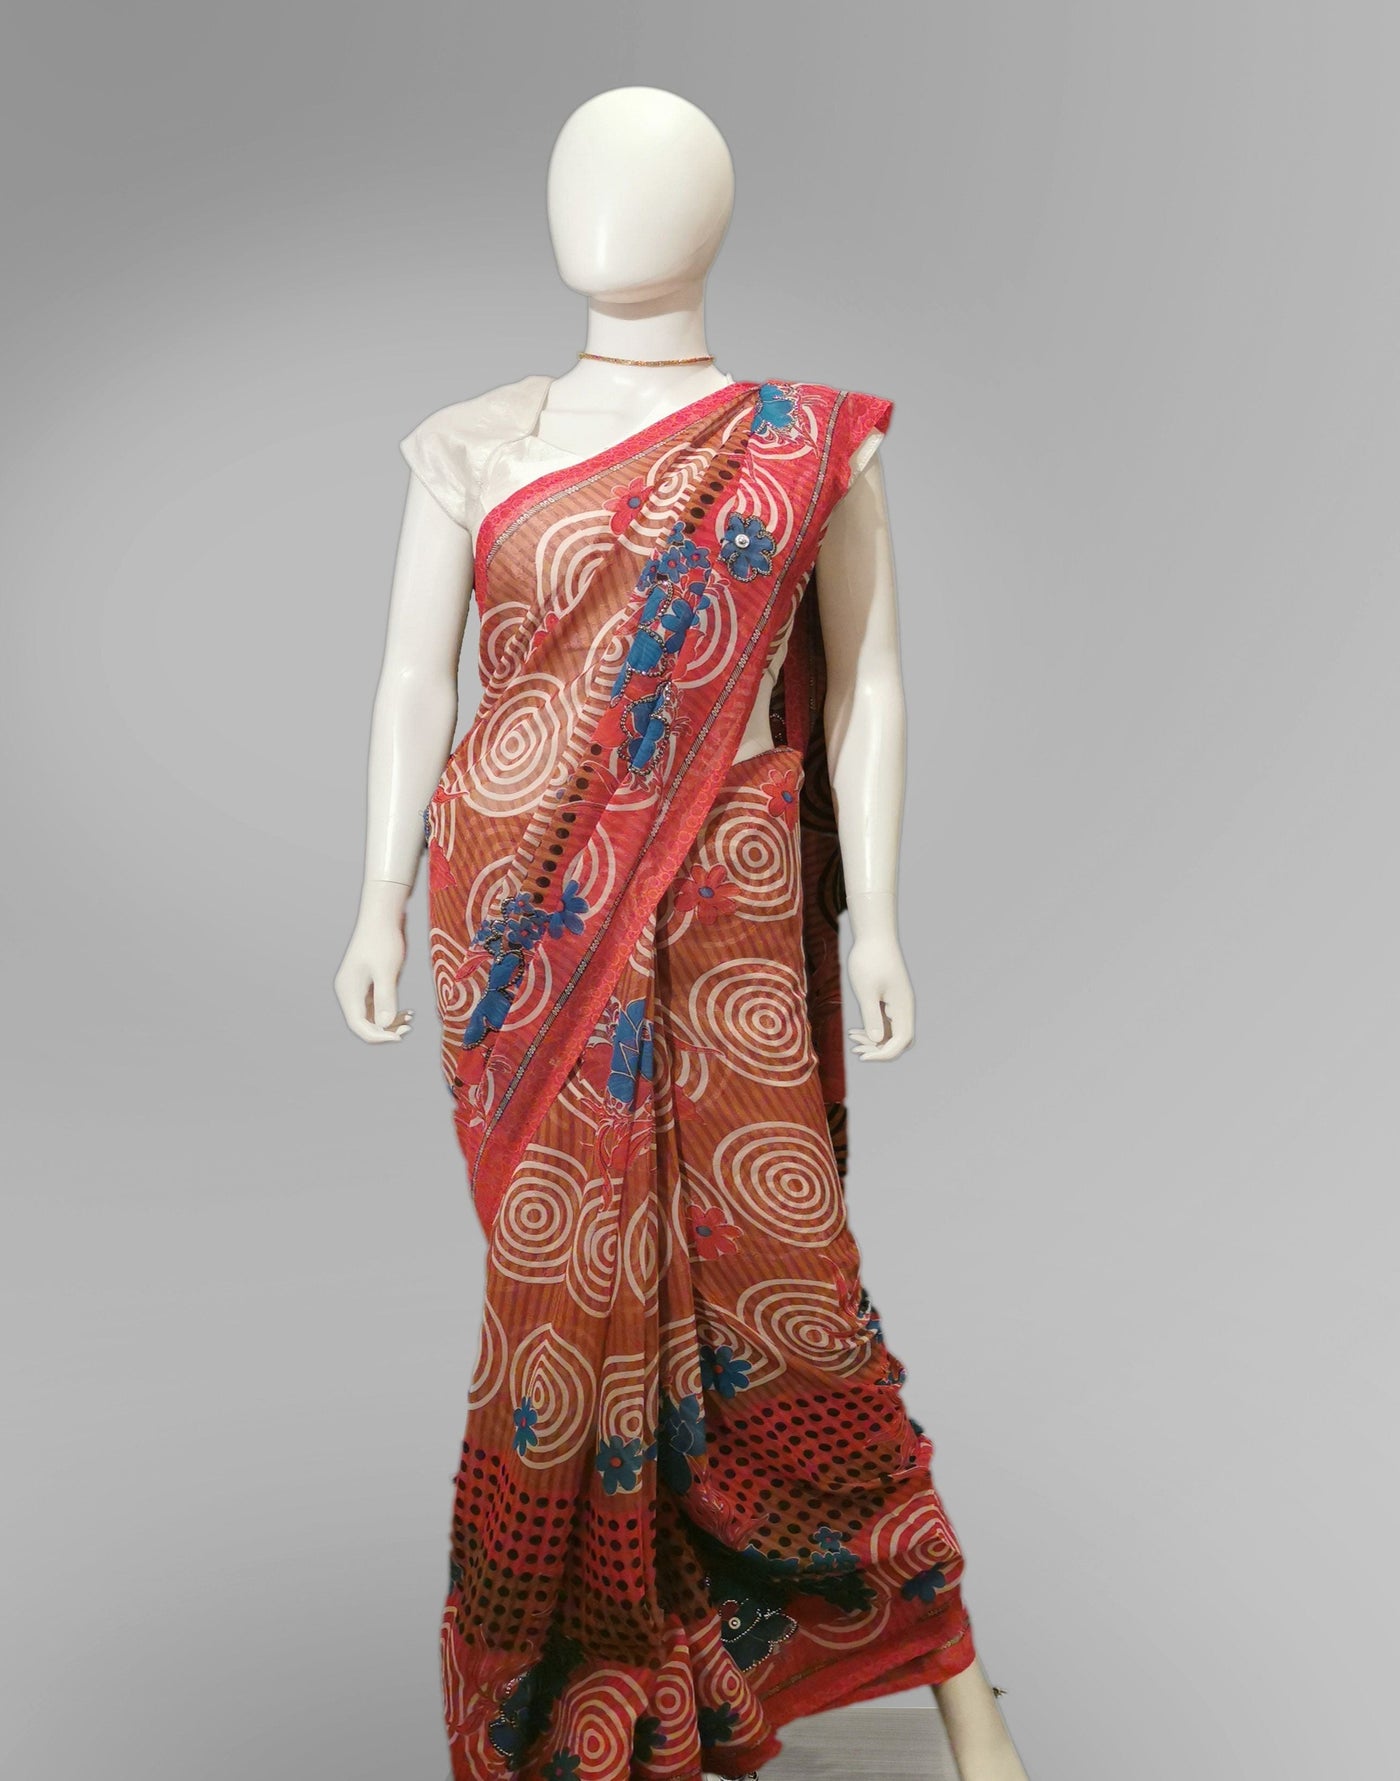 Saree in Tomato Red and Blue Floral with Sequin and Print Work Indian Clothing in Denver, CO, Aurora, CO, Boulder, CO, Fort Collins, CO, Colorado Springs, CO, Parker, CO, Highlands Ranch, CO, Cherry Creek, CO, Centennial, CO, and Longmont, CO. NATIONWIDE SHIPPING USA- India Fashion X